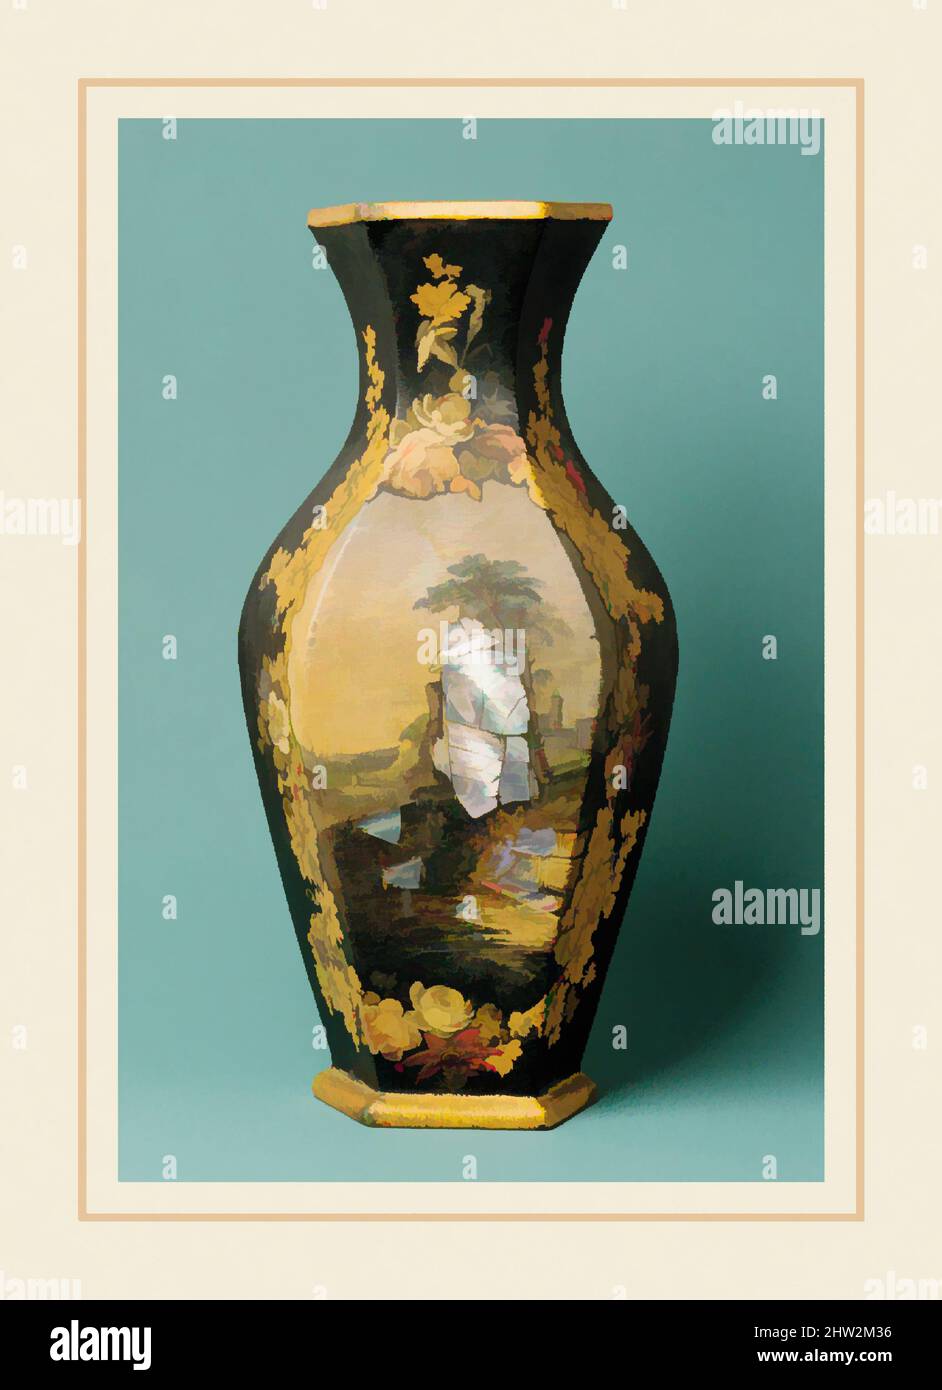 Art inspired by Vase, 1851, Made in Kensington, Pennsylvania, United States, American, Earthenware, mother-of-pearl, H. 40 3/4 in. (103.5 cm), Ceramics, Ralph Bagnall Beech (active 1845–57, Classic works modernized by Artotop with a splash of modernity. Shapes, color and value, eye-catching visual impact on art. Emotions through freedom of artworks in a contemporary way. A timeless message pursuing a wildly creative new direction. Artists turning to the digital medium and creating the Artotop NFT Stock Photo